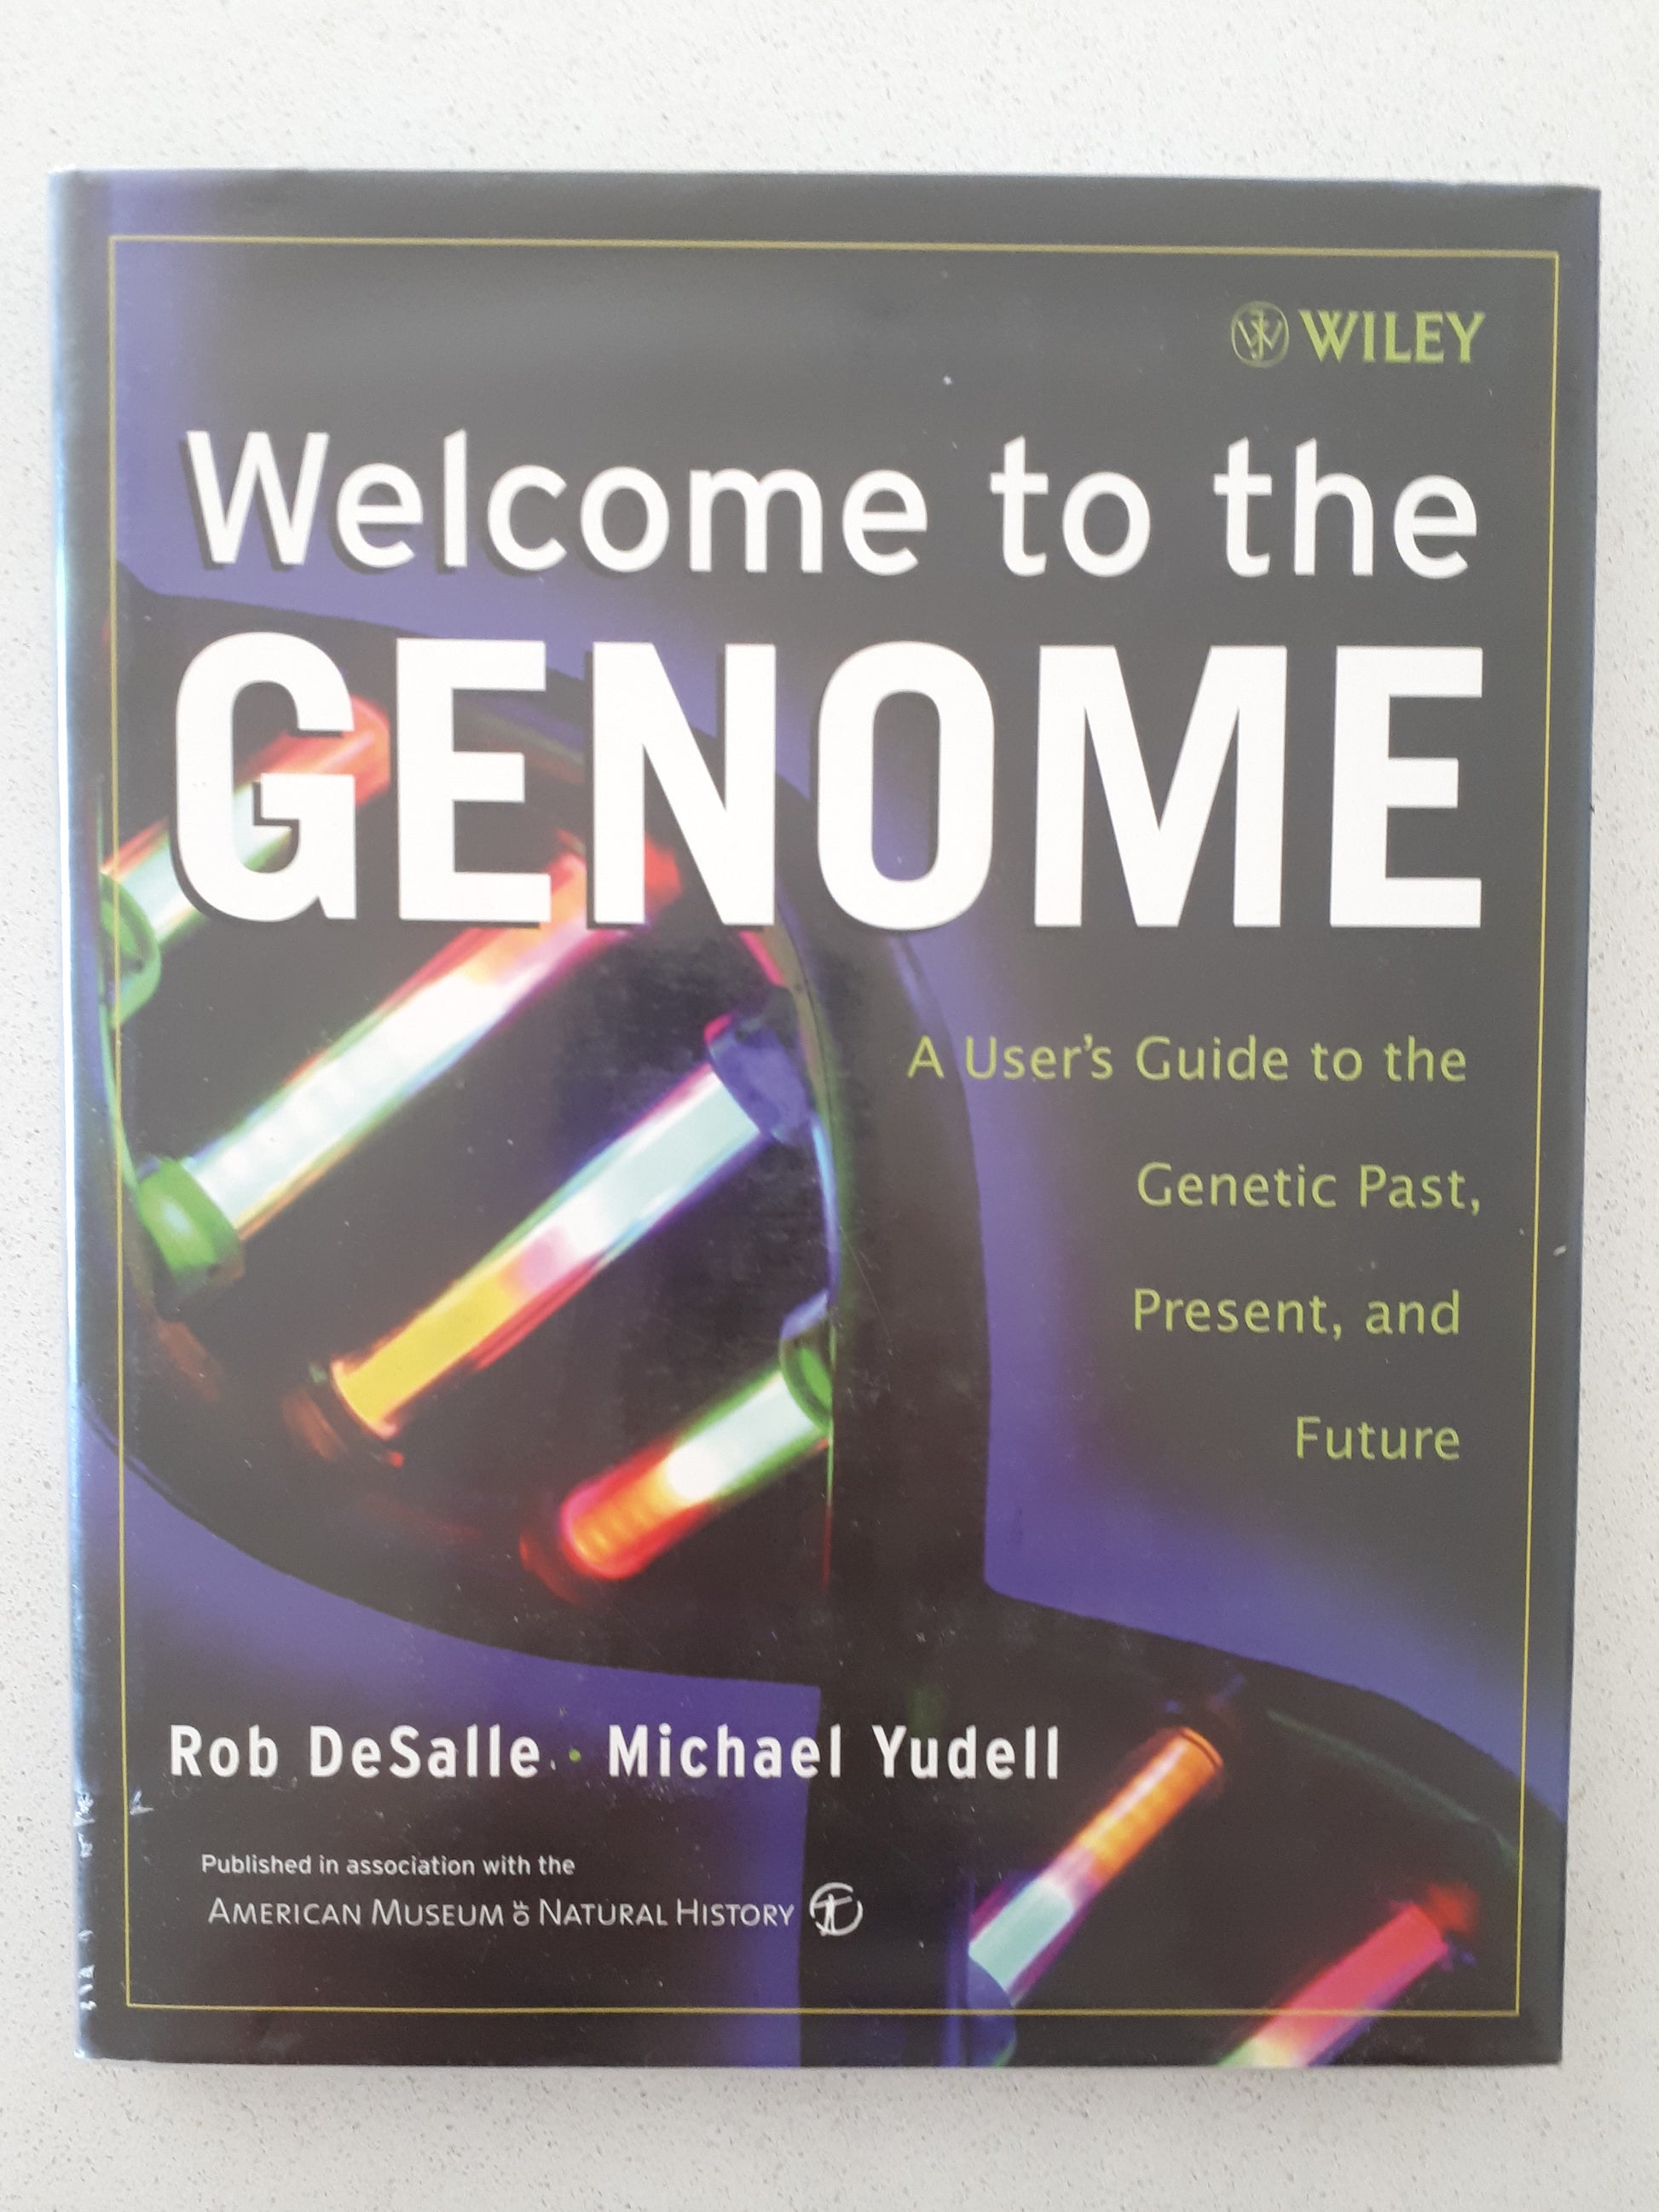 Welcome to the Genome  A User's Guide to the Genetic Past, Present, and Future  by Rob Desalle and Michael Yudell